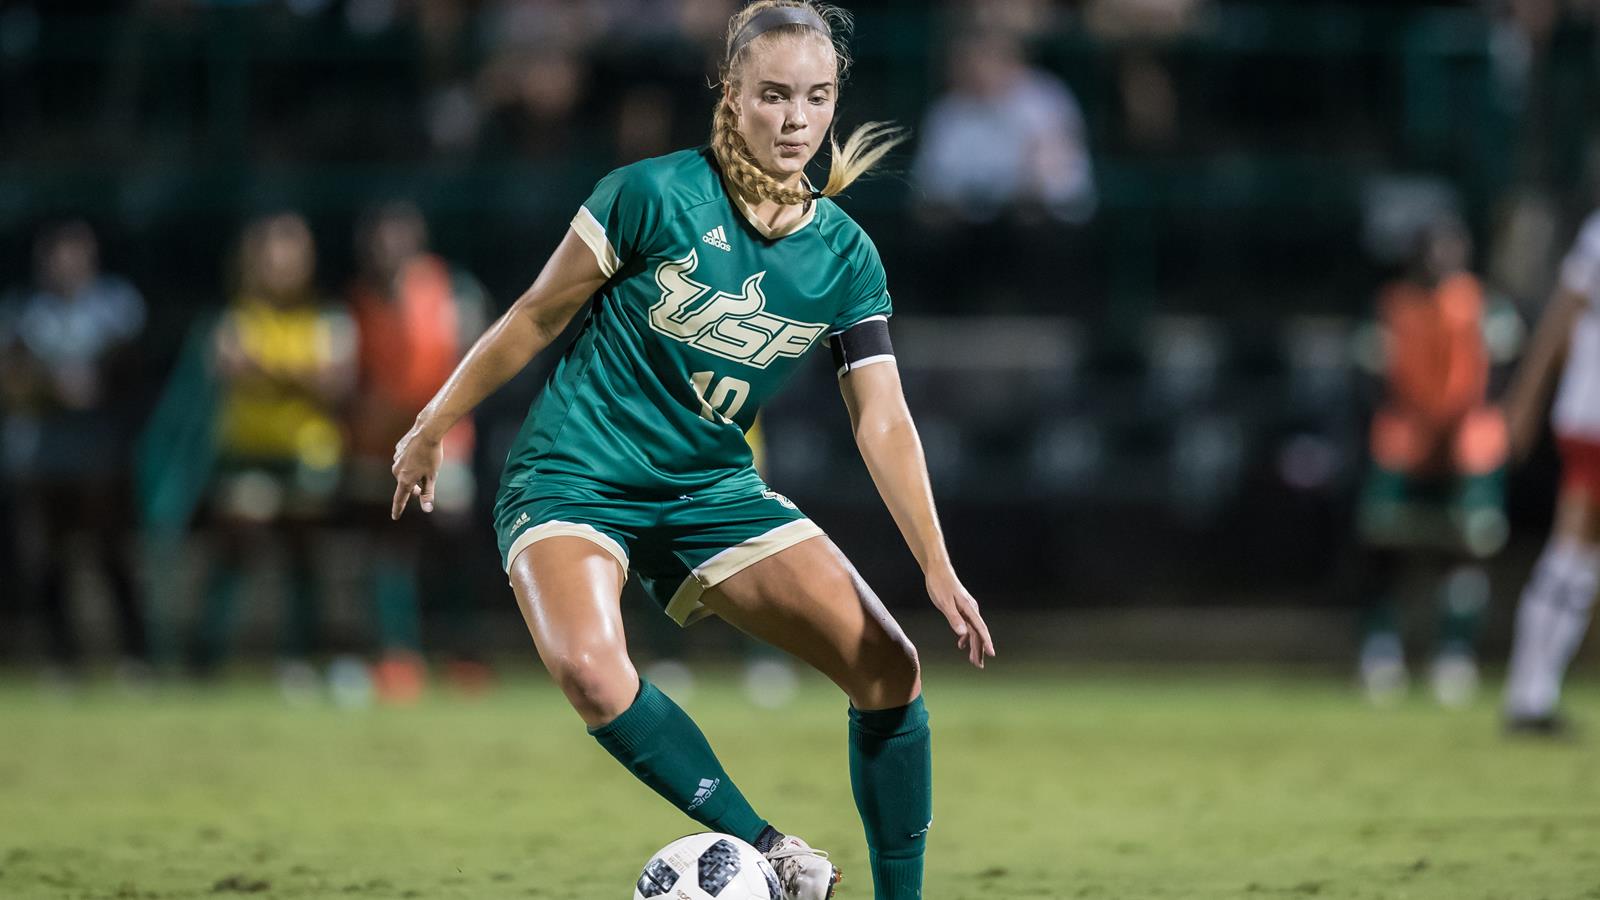 Ice, ice Andy — Hauksdottir’s penalty lifts Bulls to double-overtime victory in AAC opener